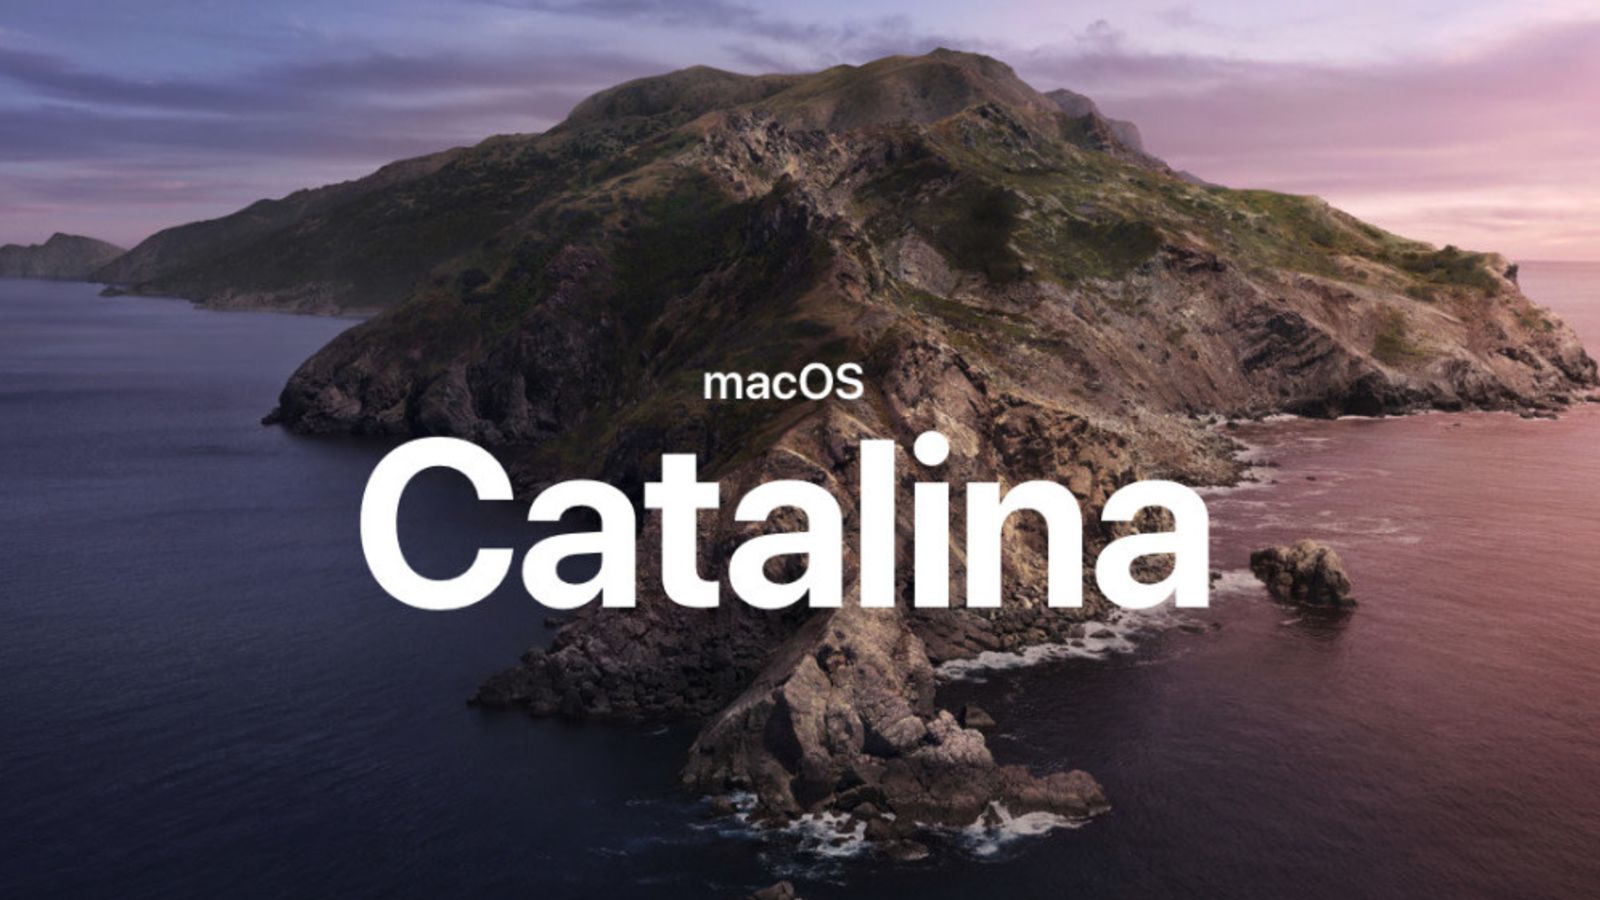 Mac Os Catalina Wallpapers For Iphone